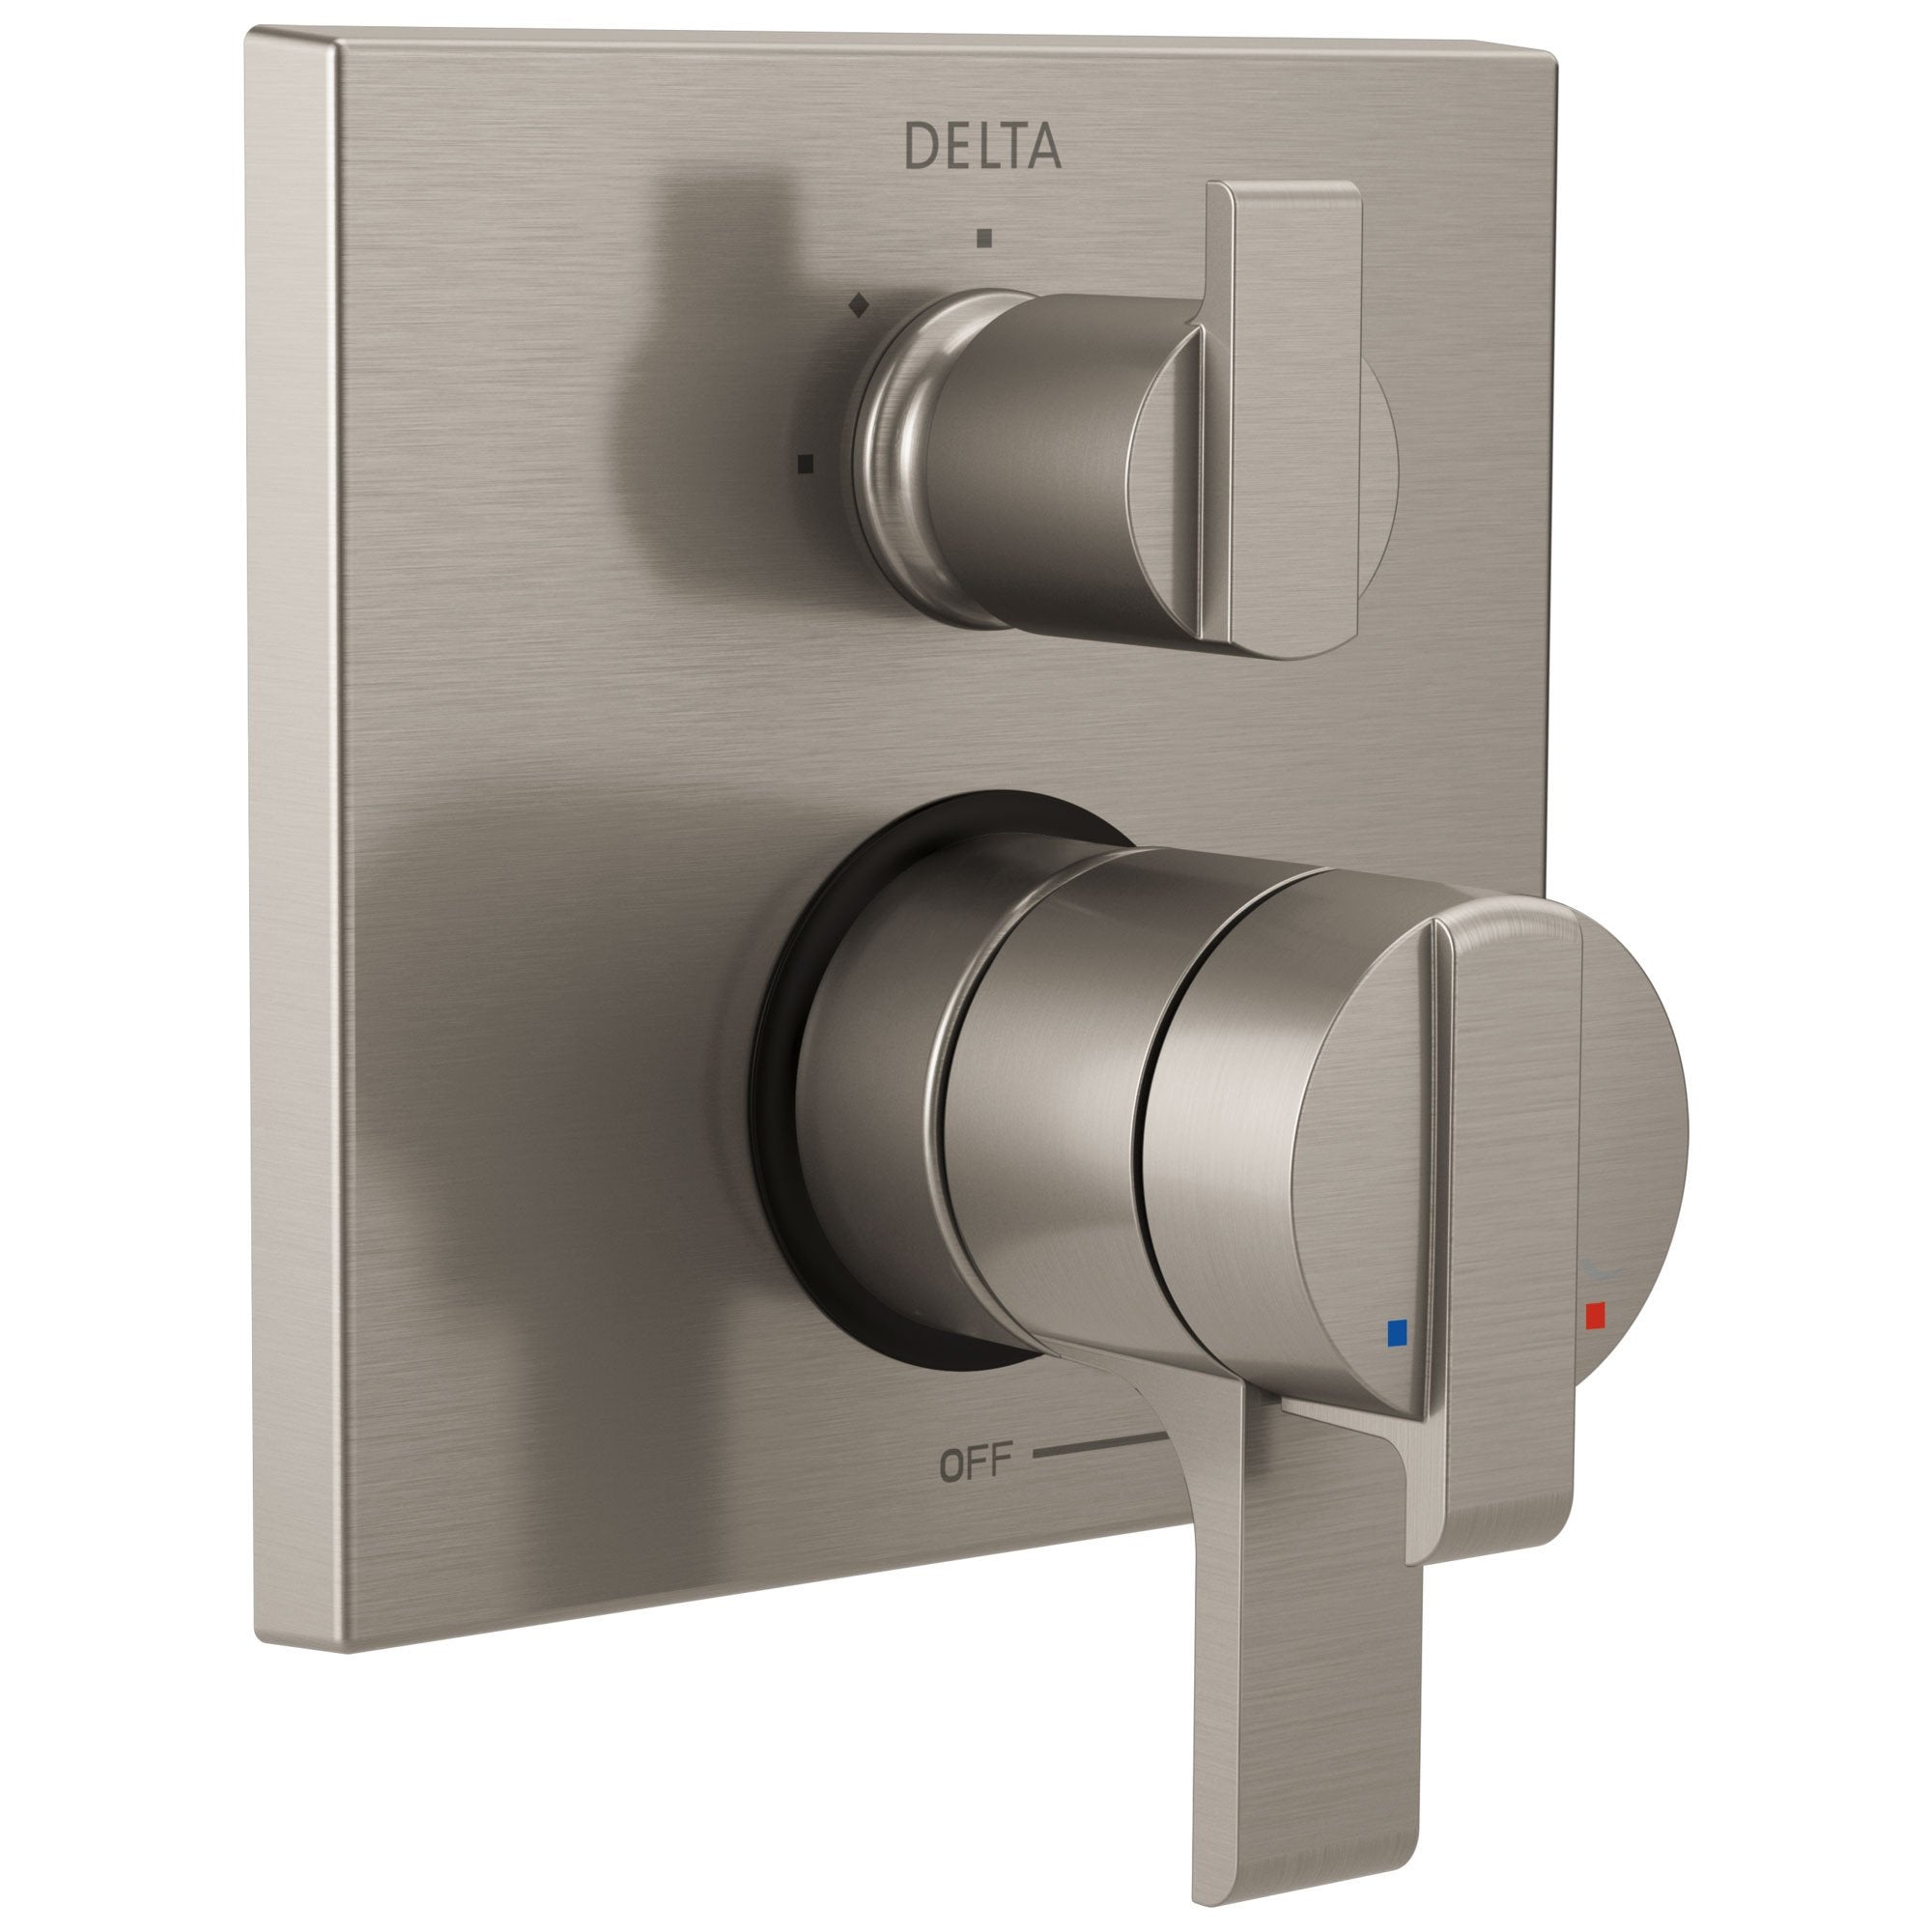 Delta Ara Collection Stainless Steel Finish Modern Shower Faucet Control Handle with 3-Setting Integrated Diverter Trim (Requires Valve) DT27867SS